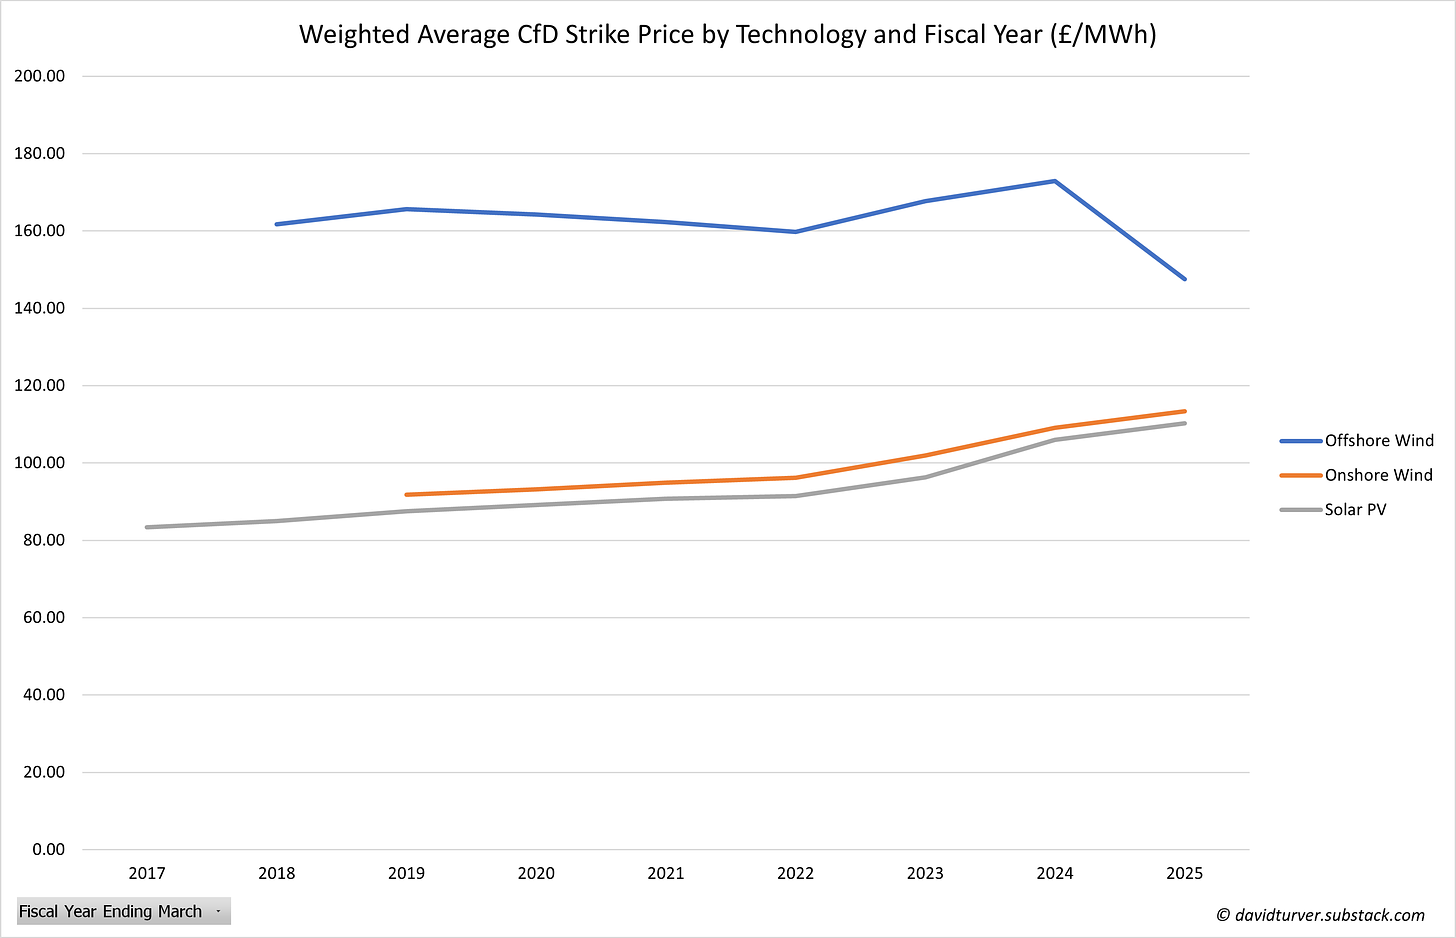 Figure 2 - Weighted Average CfD Strike Price by Technology and Fiscal Year (£ per MWh)